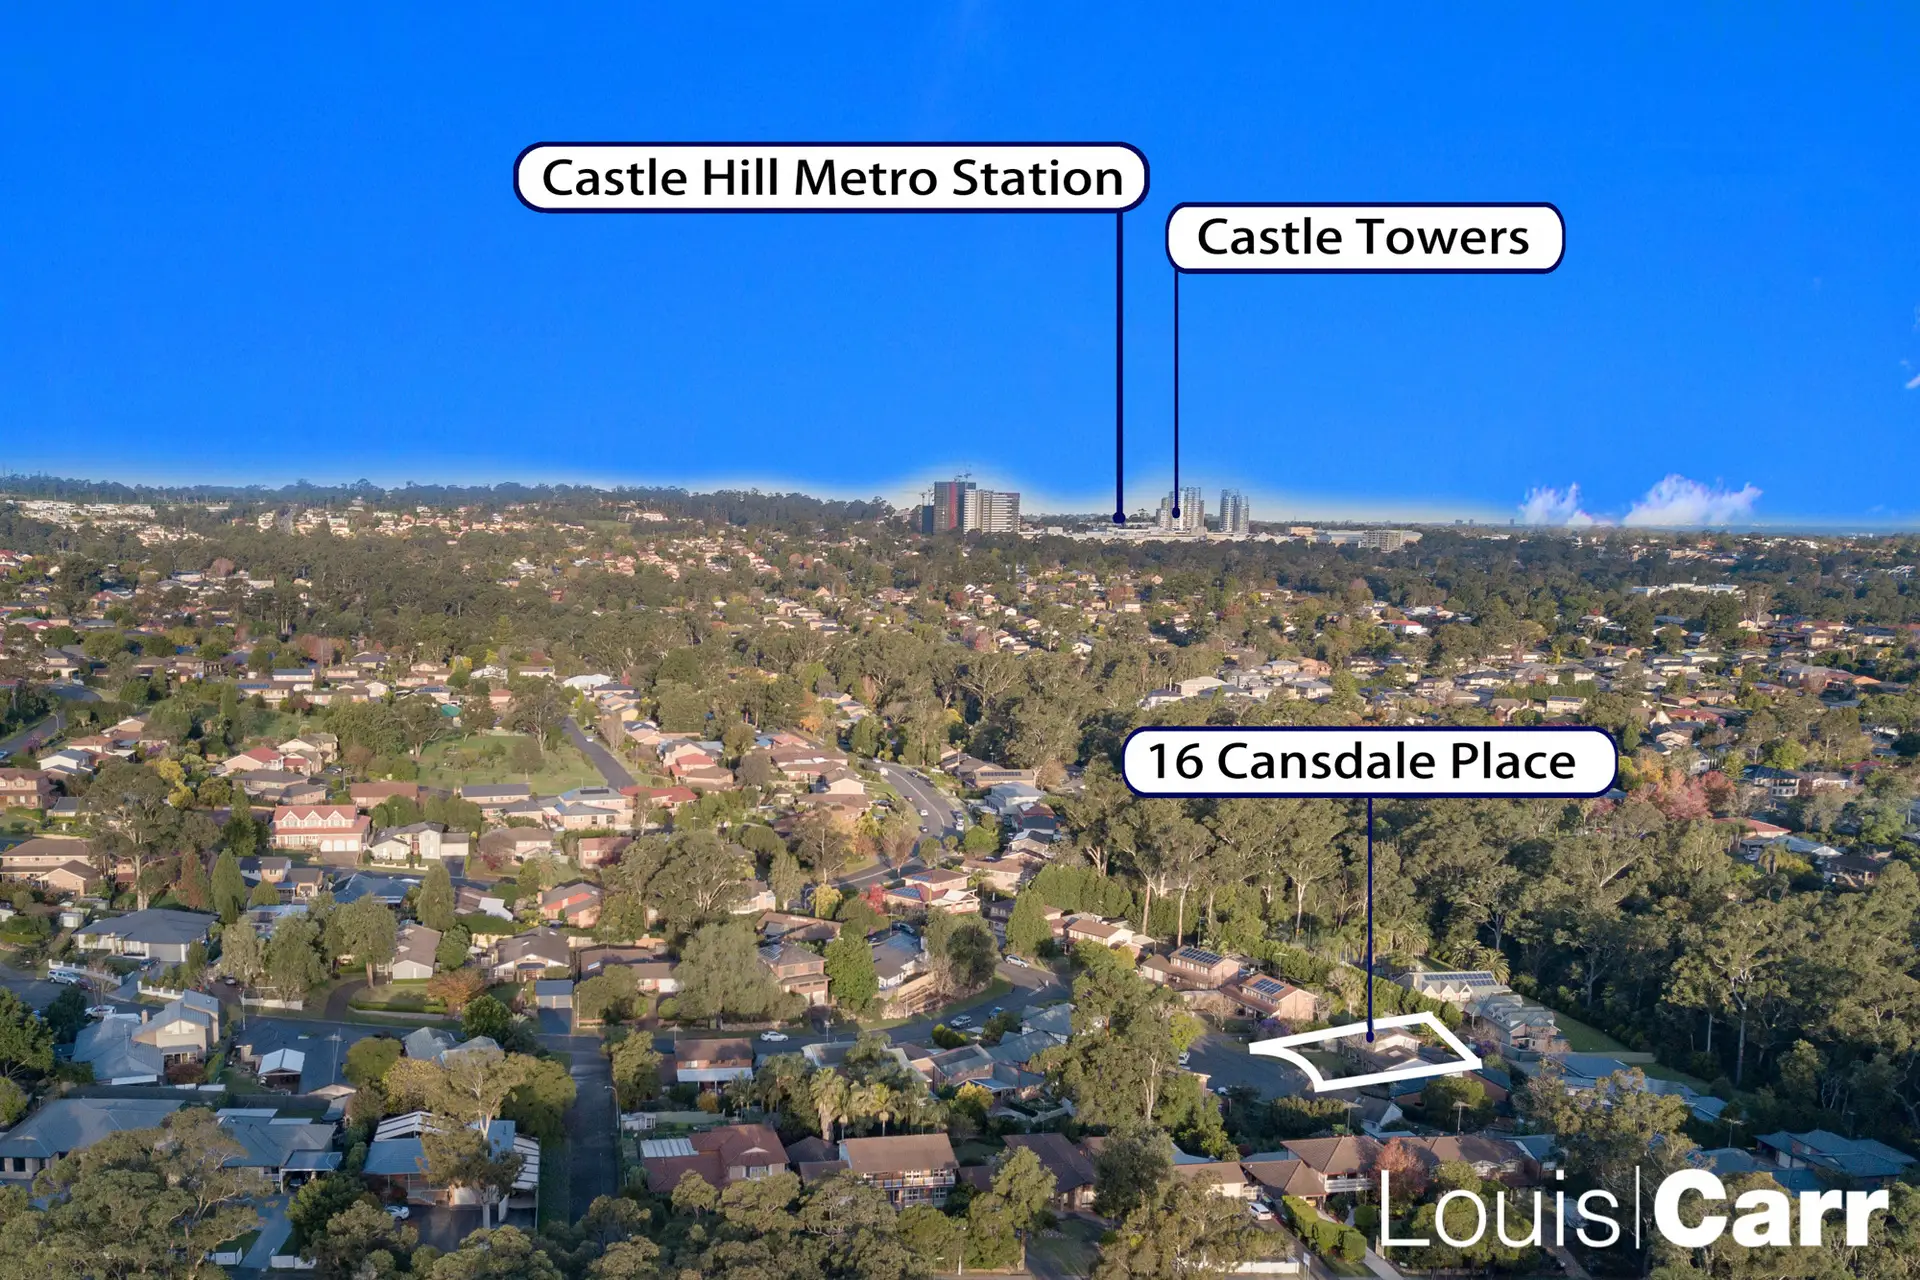 Photo #6: 16 Cansdale Place, Castle Hill - Sold by Louis Carr Real Estate